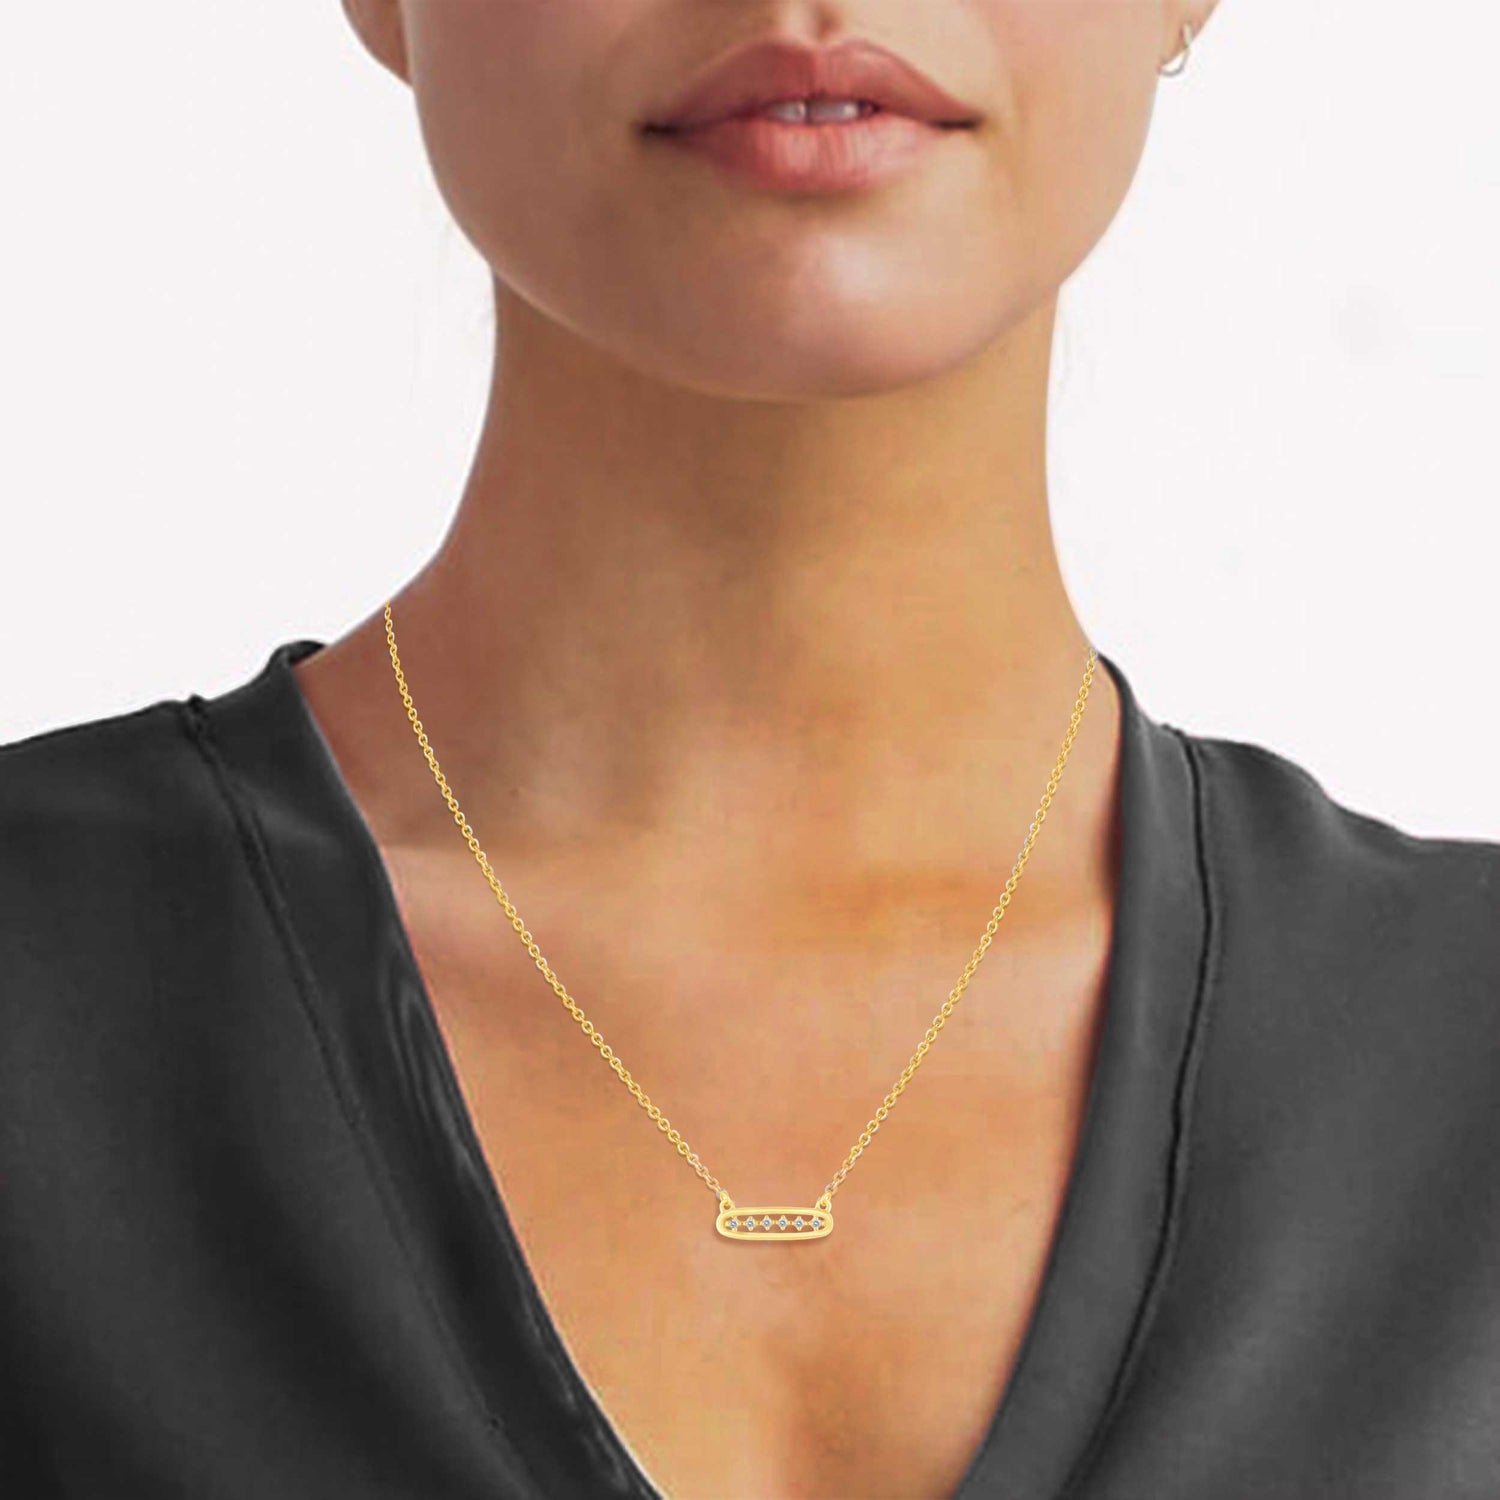 1/10 Cttw Diamond Open Bar Center Station Pendant Necklace set in 925 Sterling Silver Yellow Gold Plating